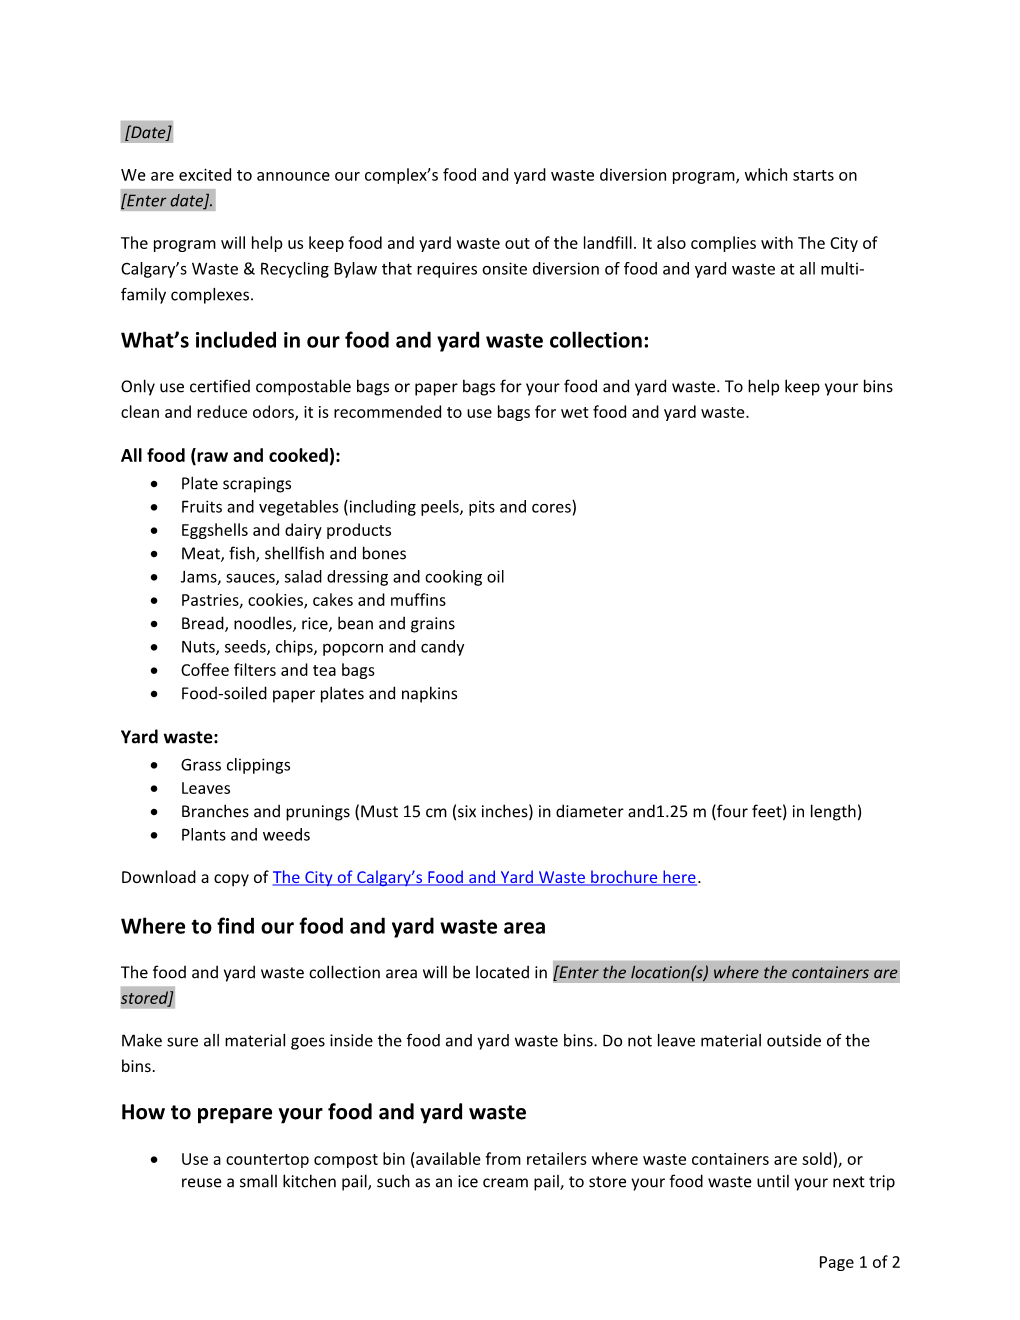 Multi-Family Food and Yard Waste Program Letter